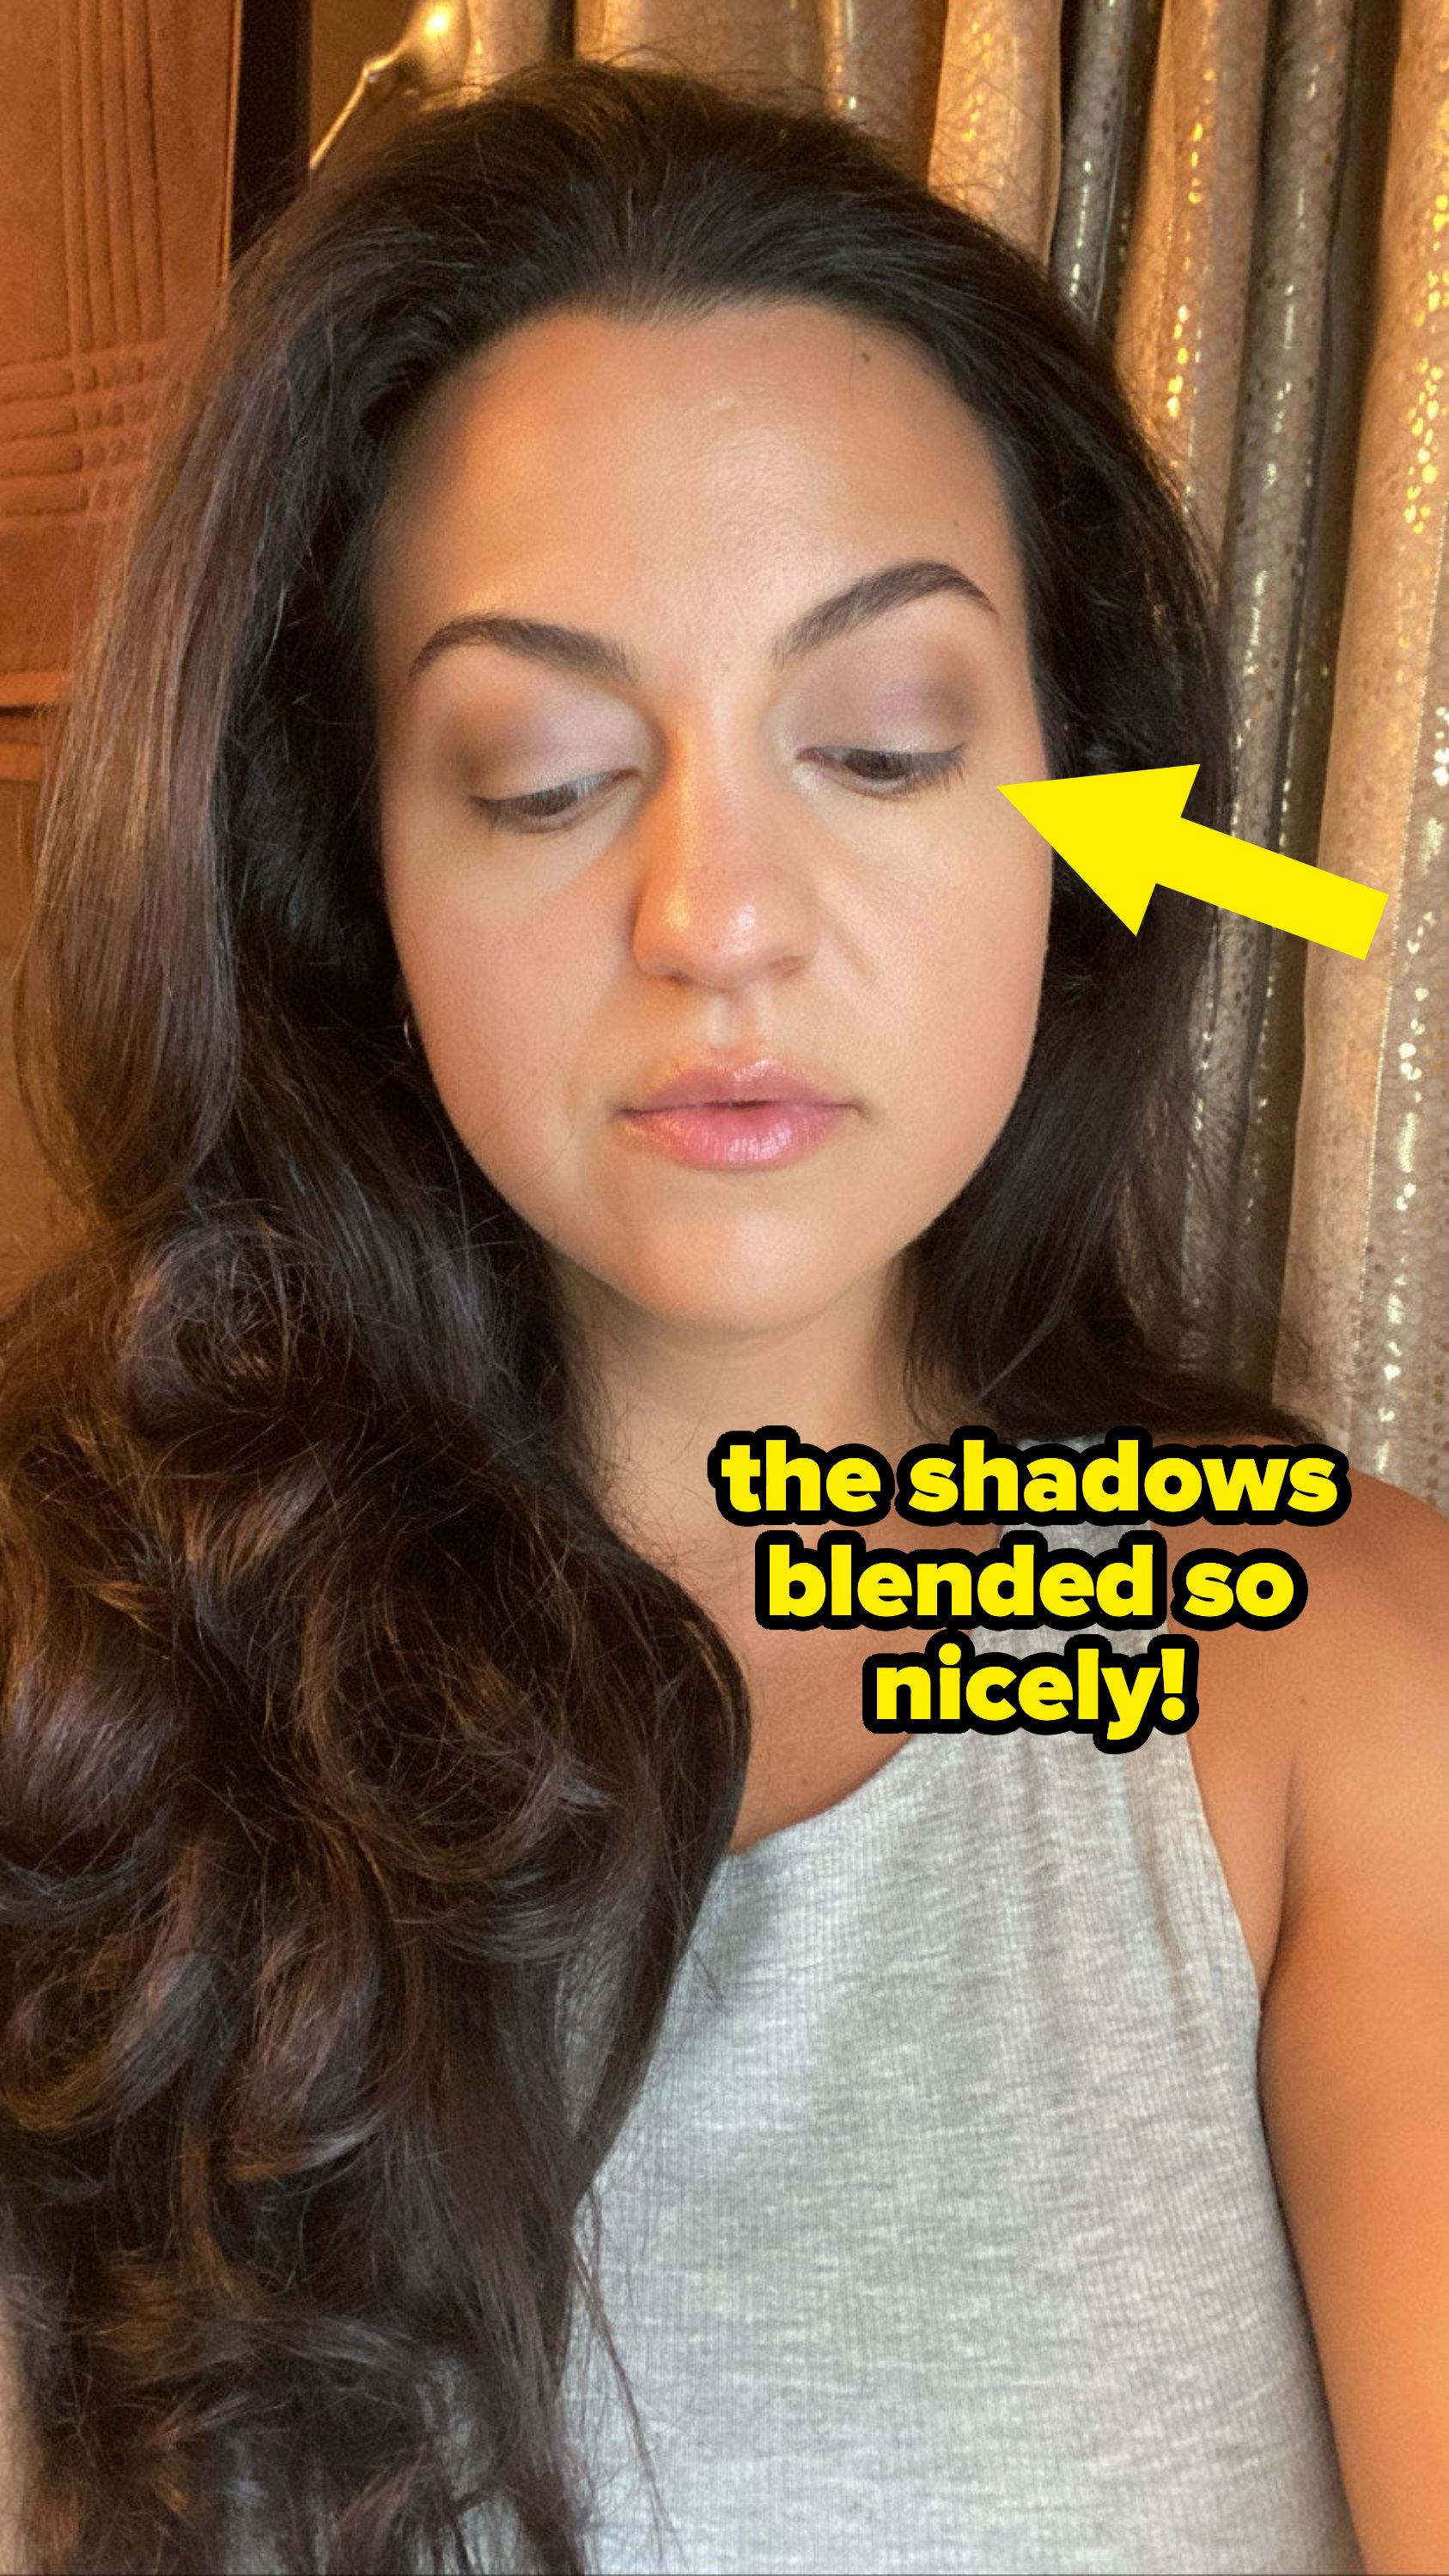 the author with the eyeshadow on and the words &quot;The shadows blended so nicely!&quot;